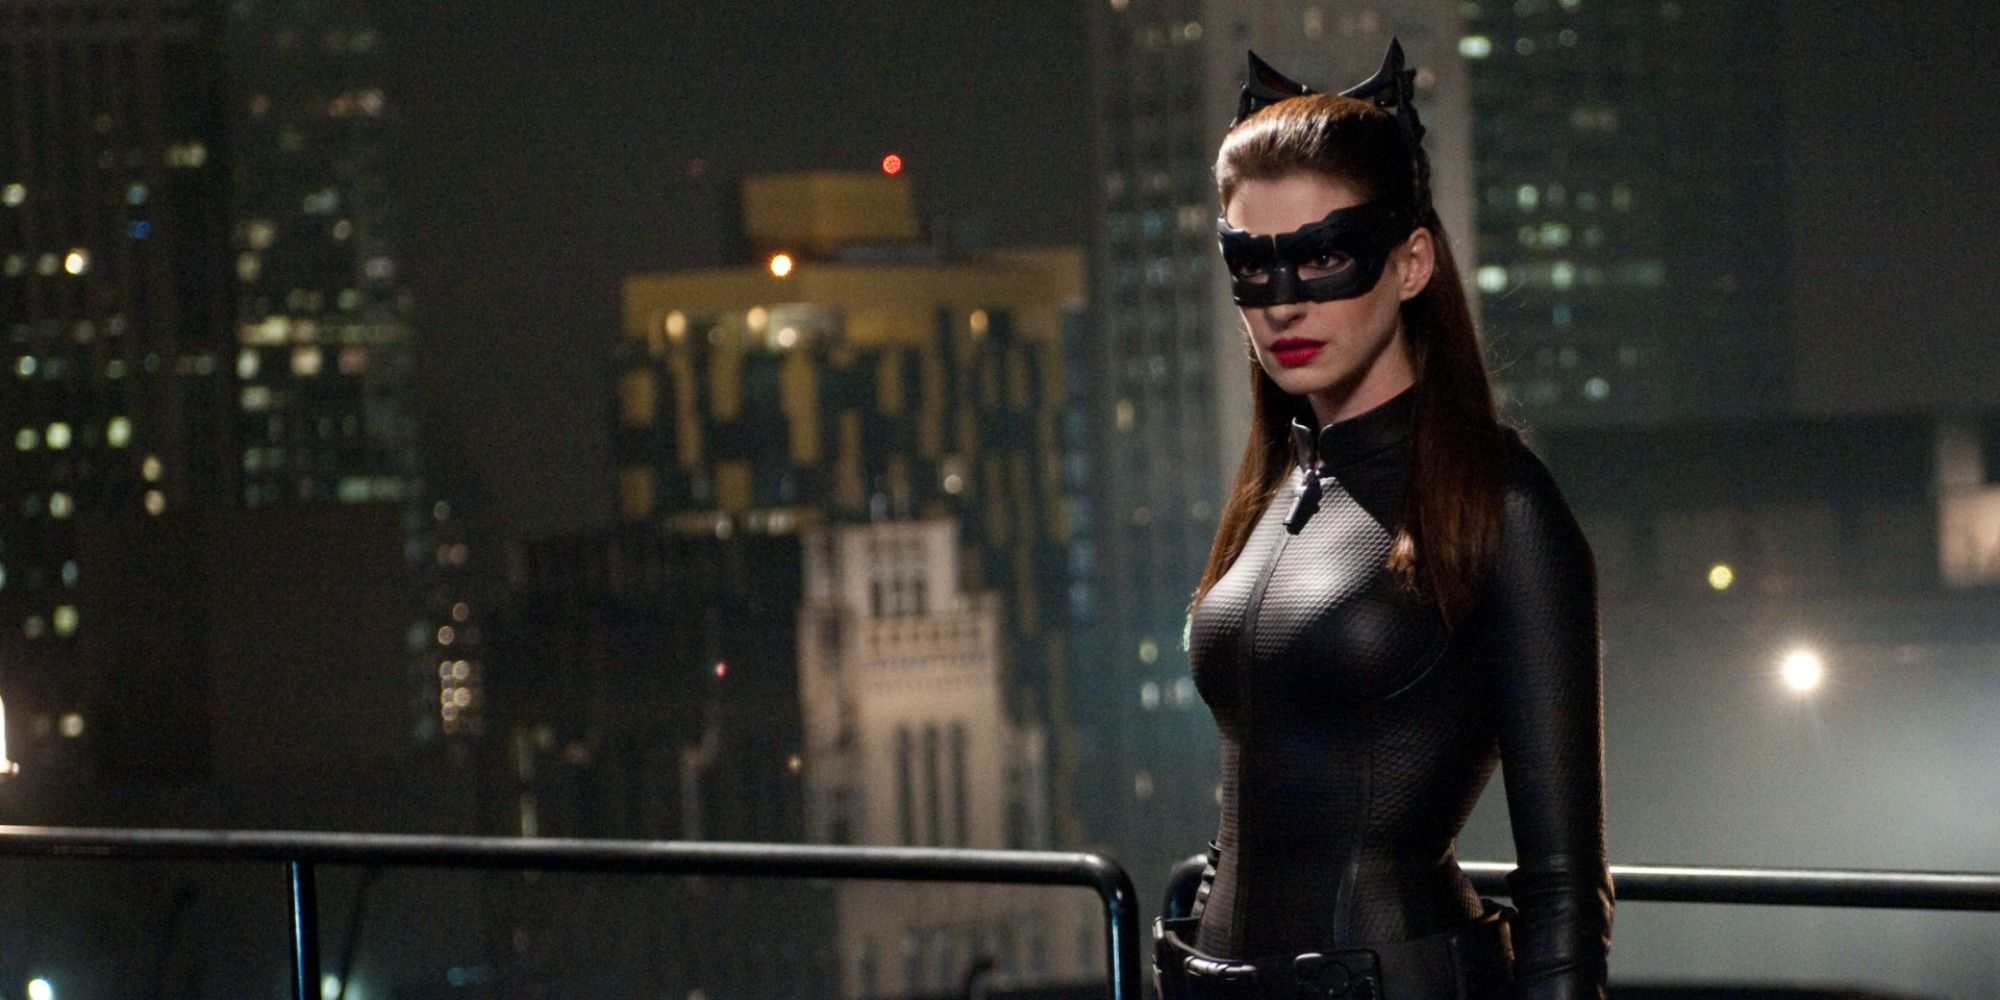 Catwoman in The Dark Knight Rises (2012)